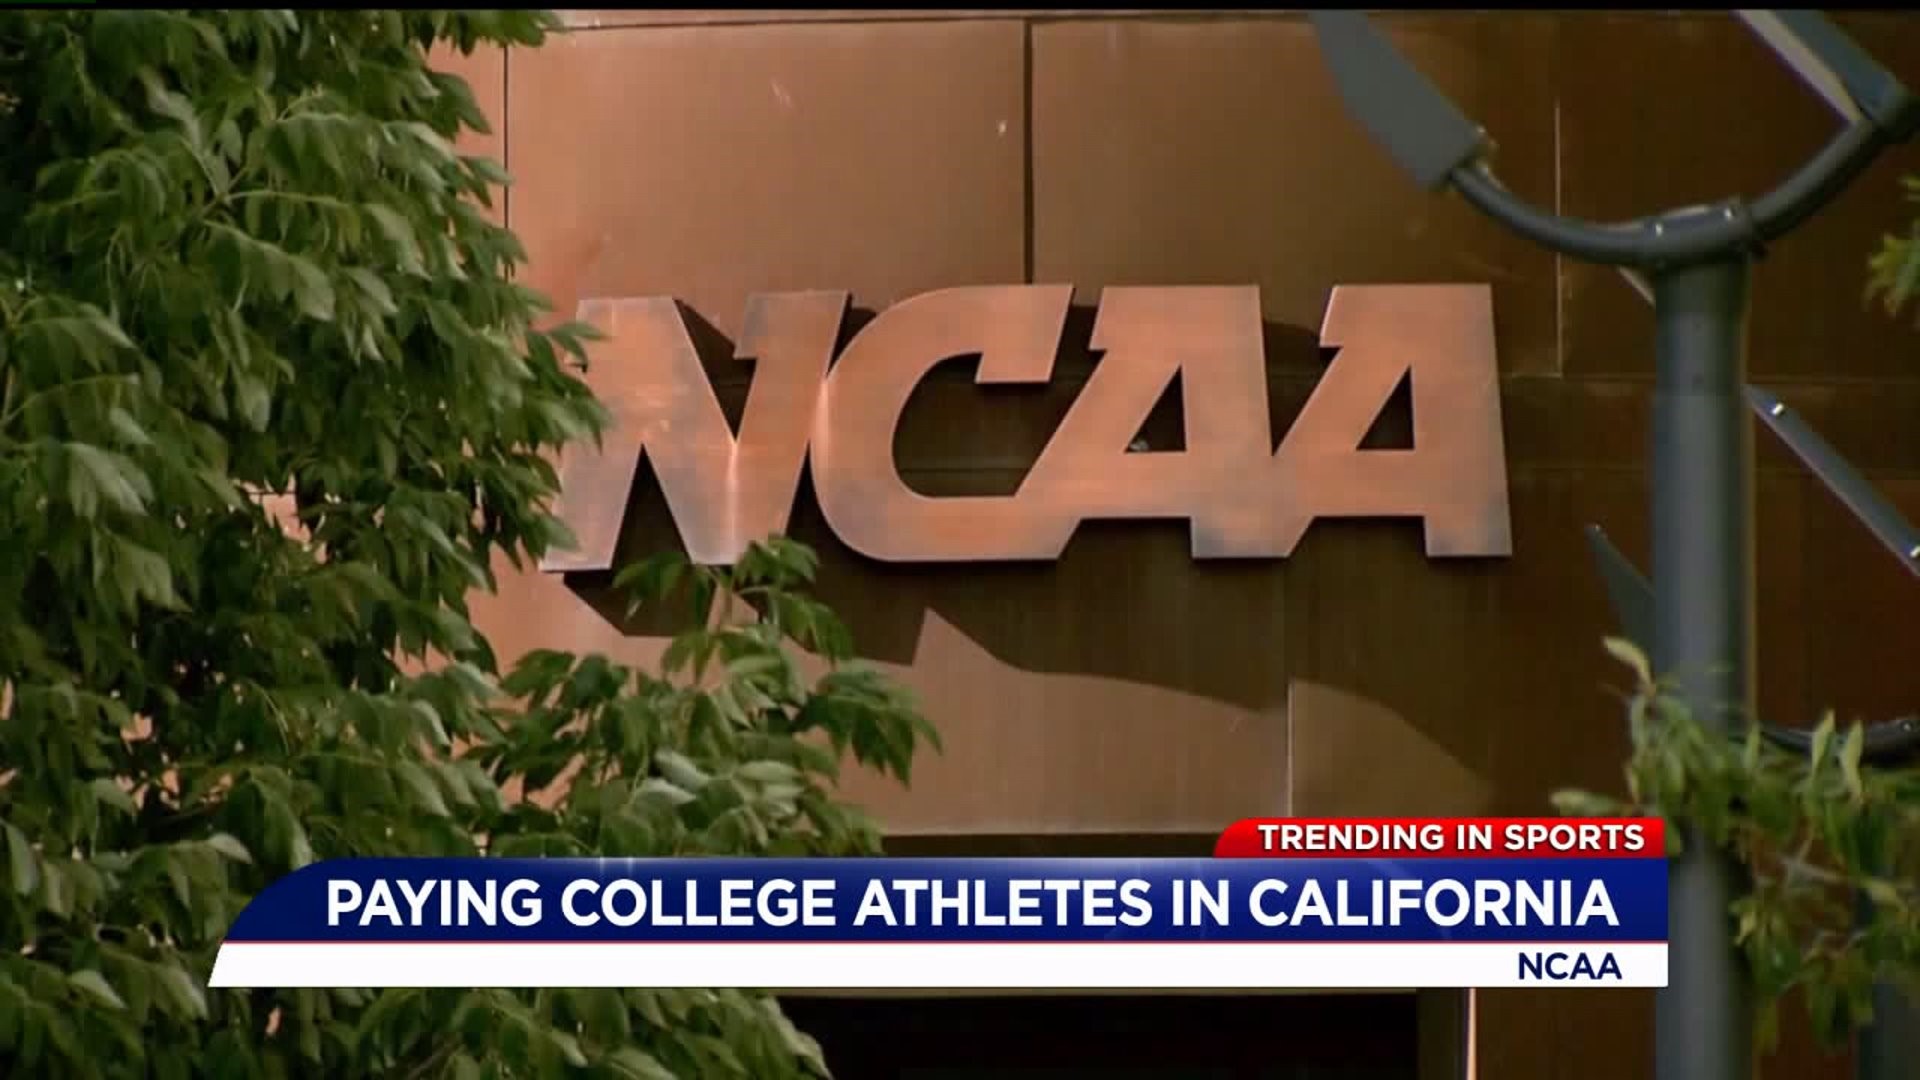 California just passed a law that allows college athletes to get paid